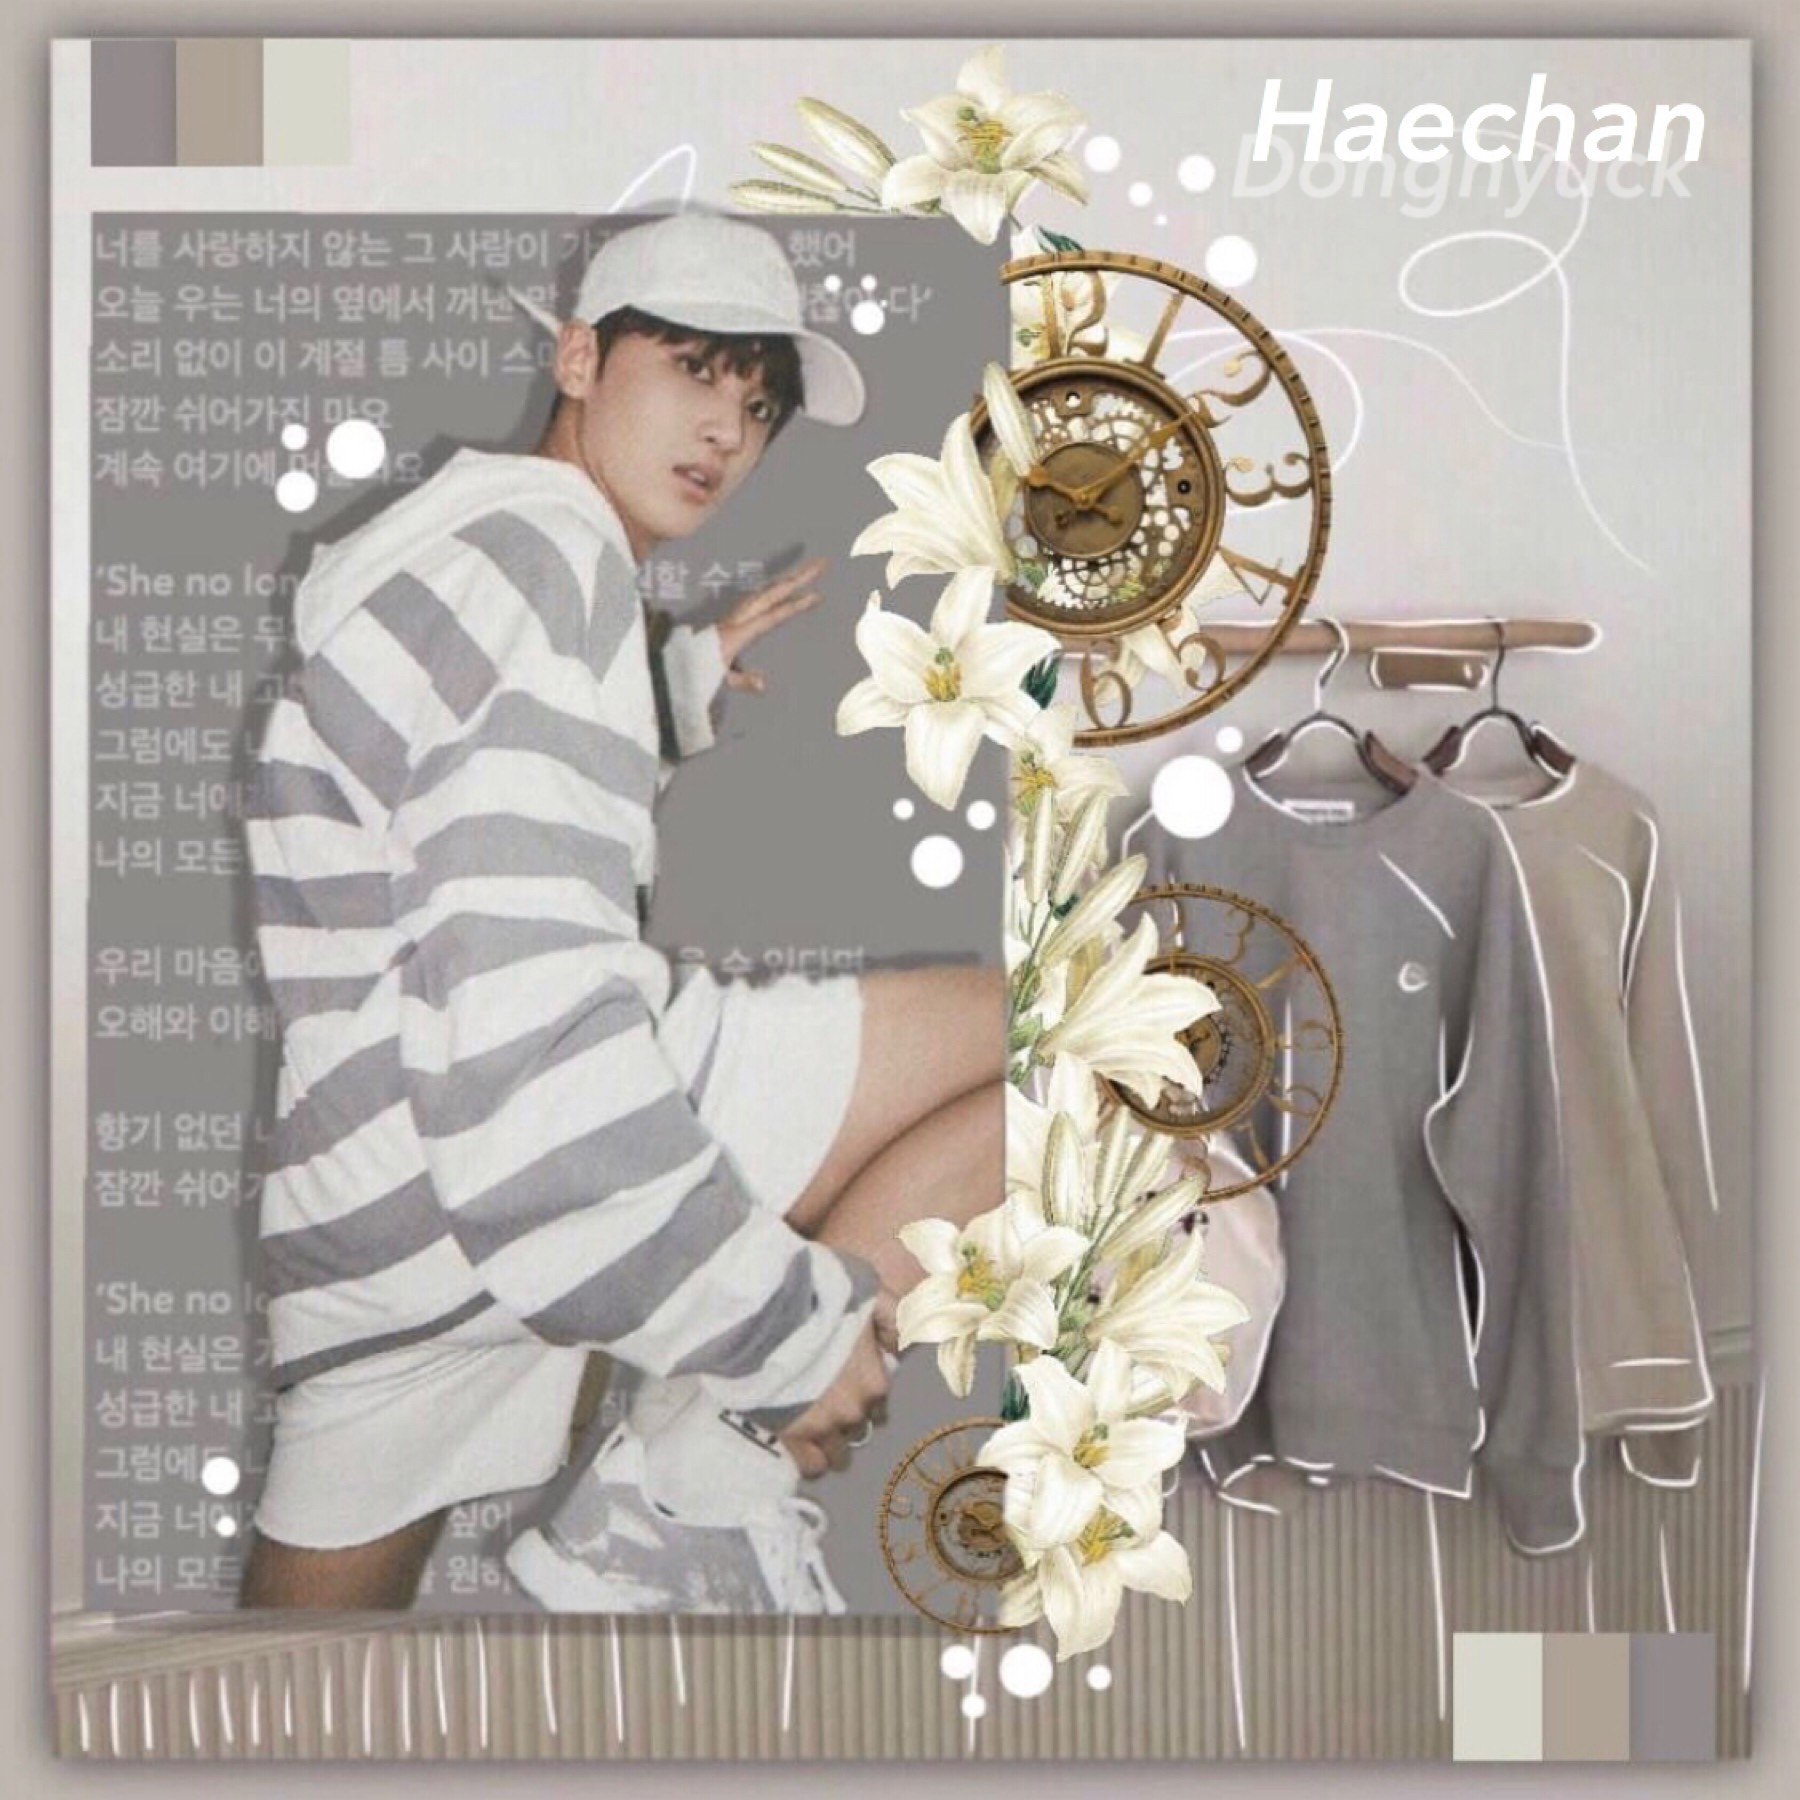 ➴ 𝔓𝔢𝔞𝔠𝔥𝔢𝔰 𝔞𝔫𝔡 ℭ𝔯𝔢𝔞𝔪 ➶
-Hola brochachos 🤠
-We have come to pass down this hyuck edit owo 
-And liek this is our second edit and I don't really know what else to say except I asked for help with the caption but my bro was in the car -.-
-Dont forget to save